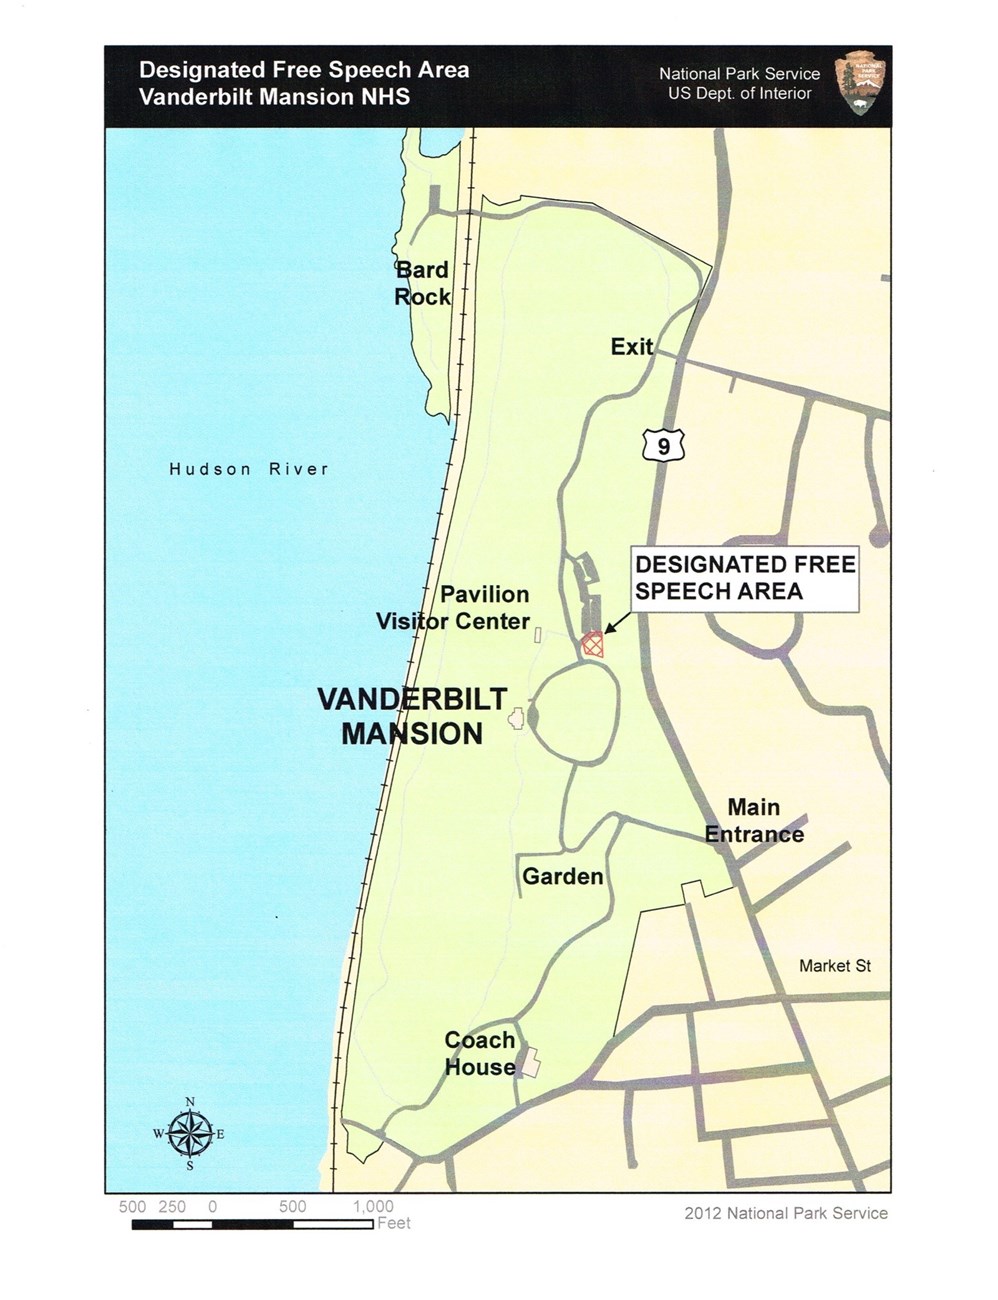 A map showing the designated free speech area for Vanderbilt Mansion NHS